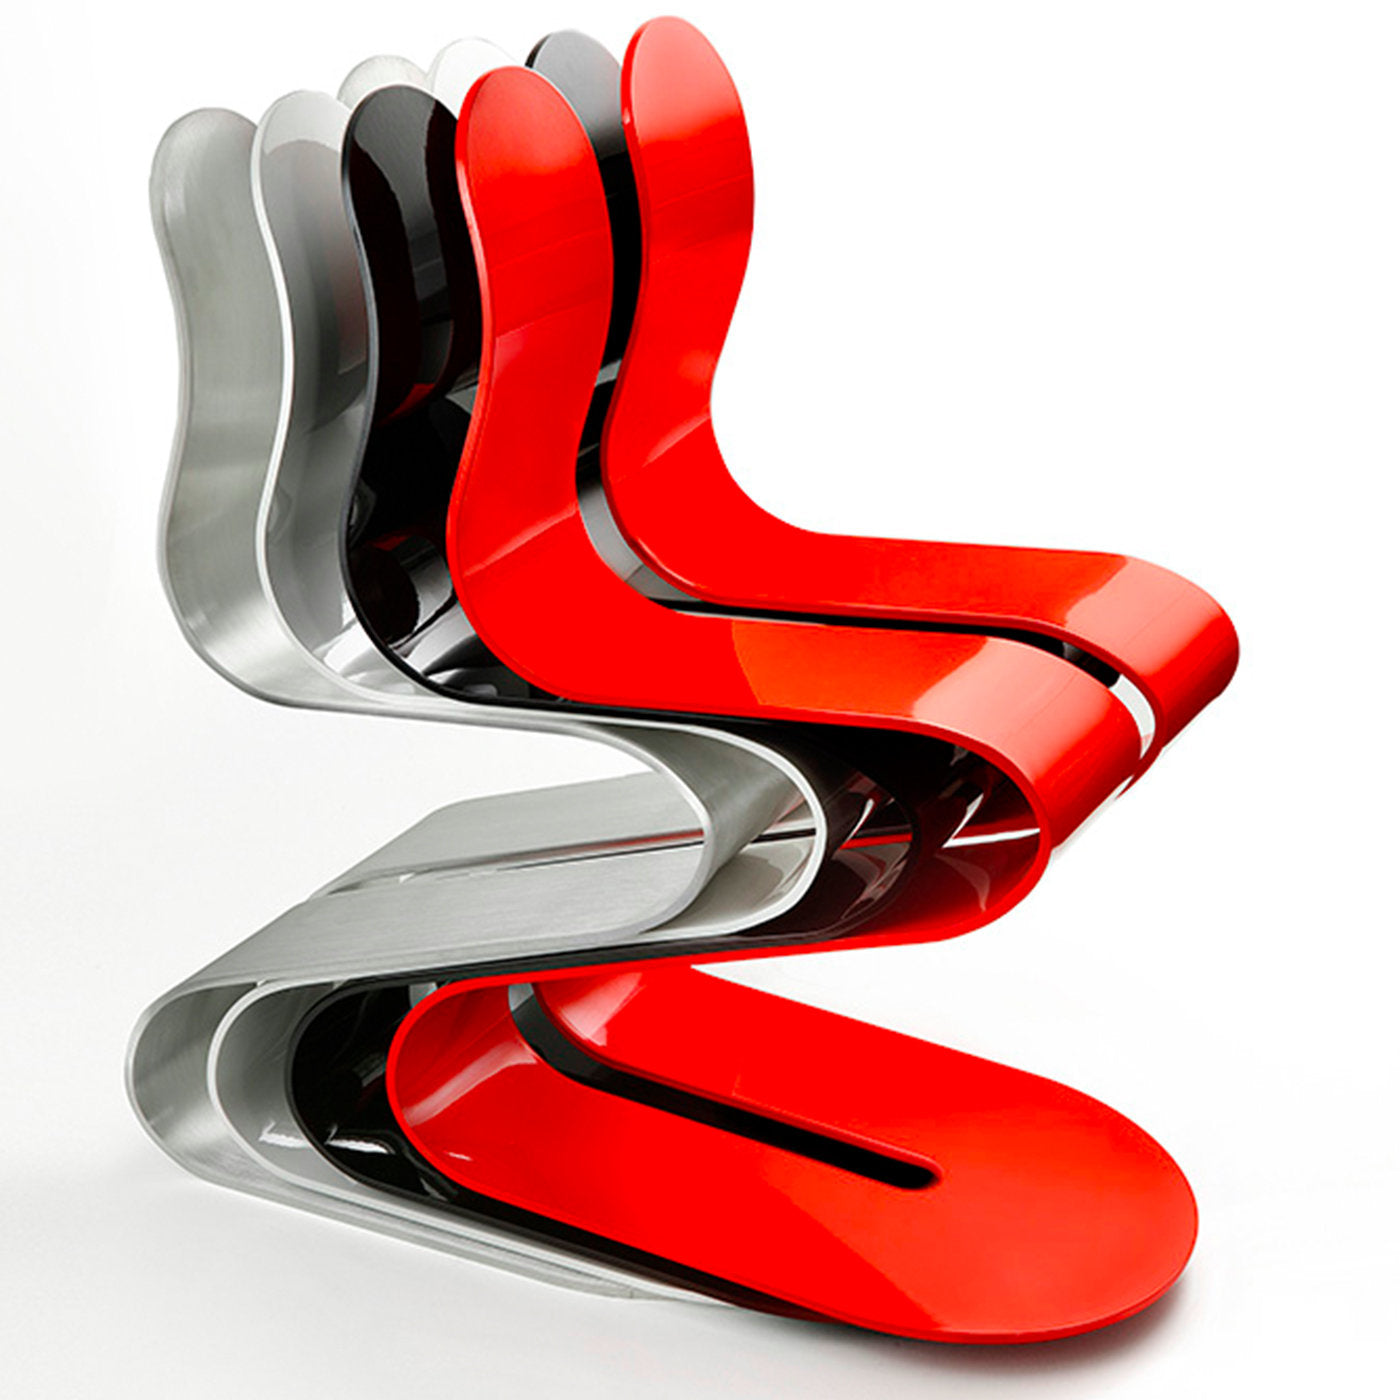 Fluid Ribbon Red Chair by Michael D'Amato - Alternative view 3